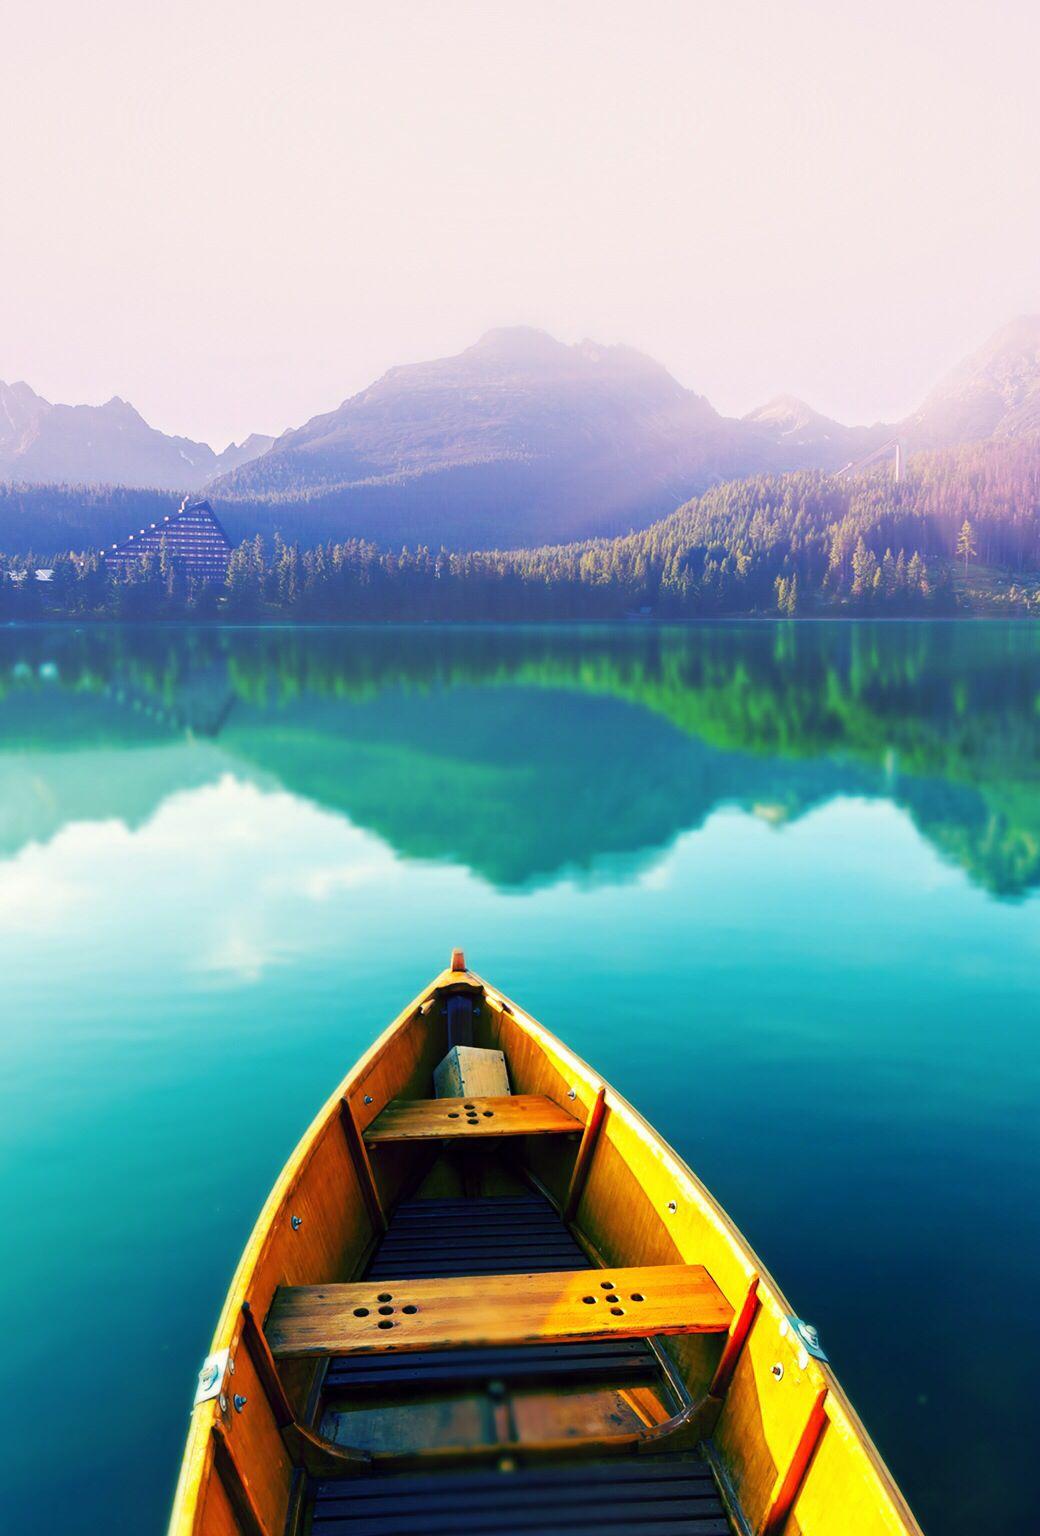 Rowboat in blue water & mountains. Boat wallpaper, Best iphone